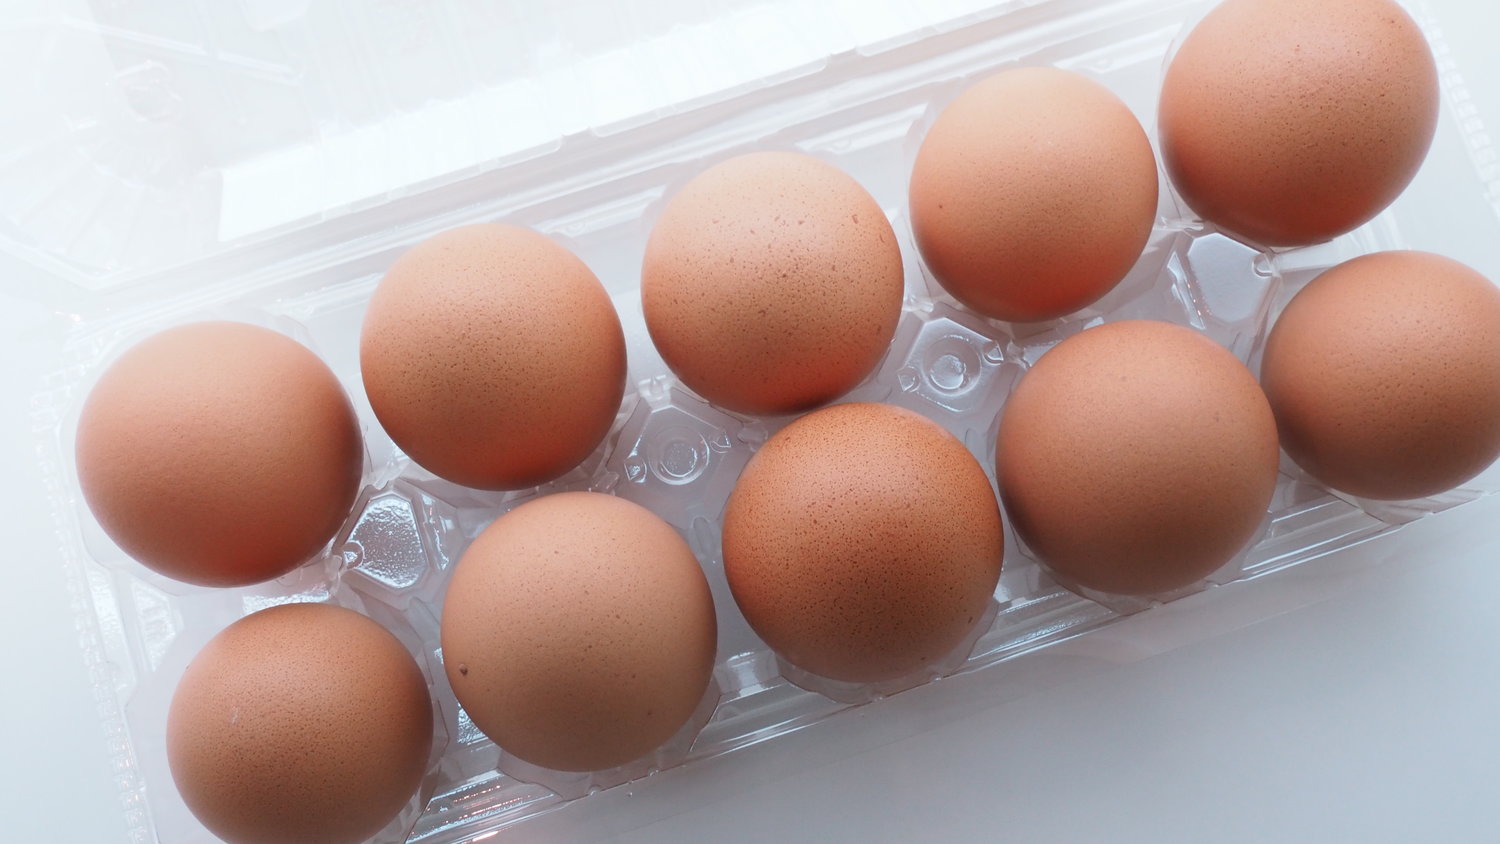 A dozen eggs hit $4.25 nationally in December, nearly a 140% increase since a year before.